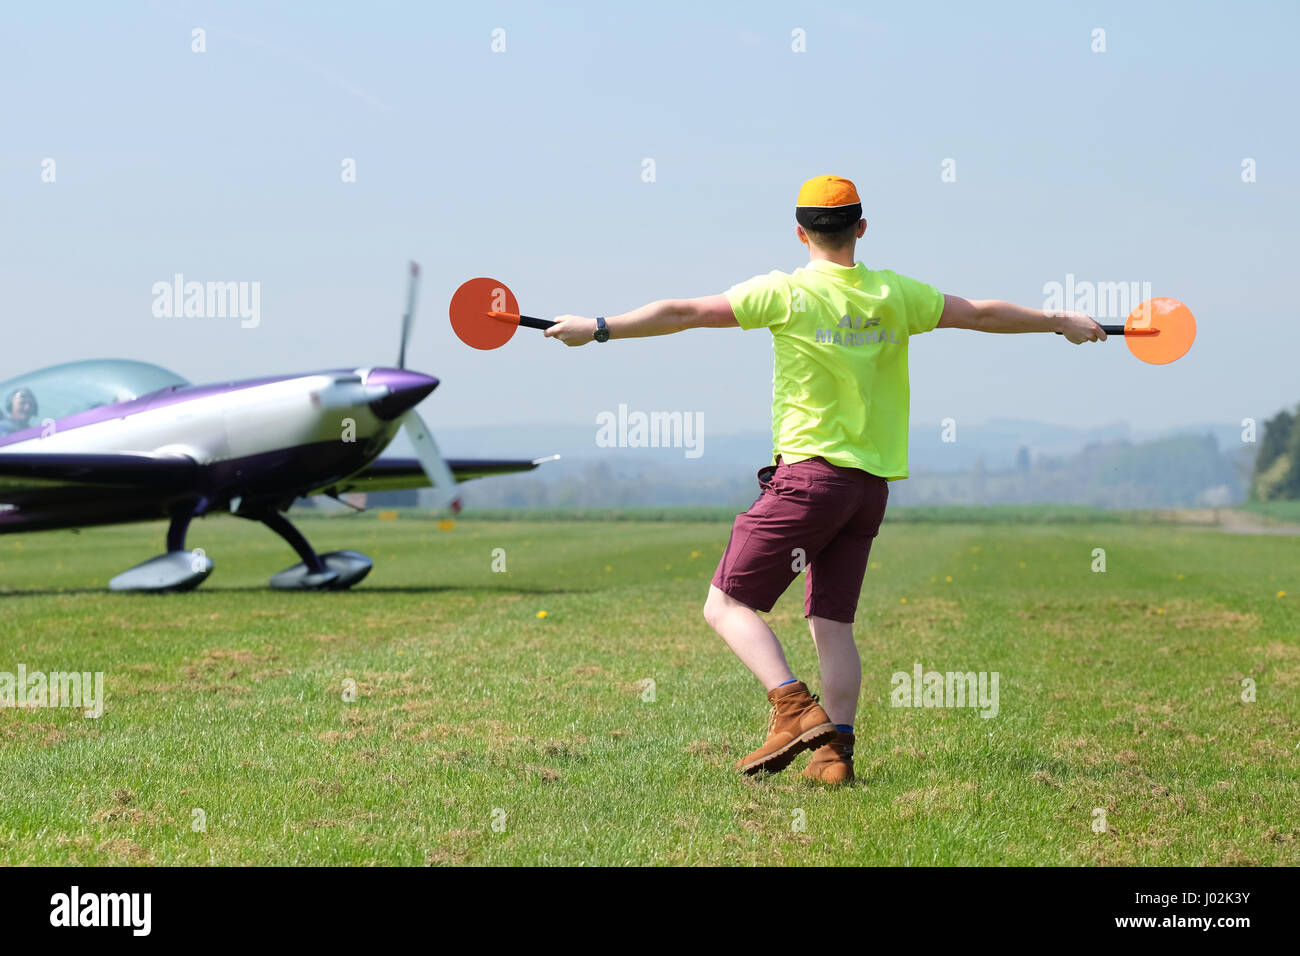 Shobdon airfield, Herefordshire, UK. April, 2017. General aviation airfield ground marshaller directs a taxying Extra EA300 aircraft. Credit: Steven May/Alamy Live News Stock Photo